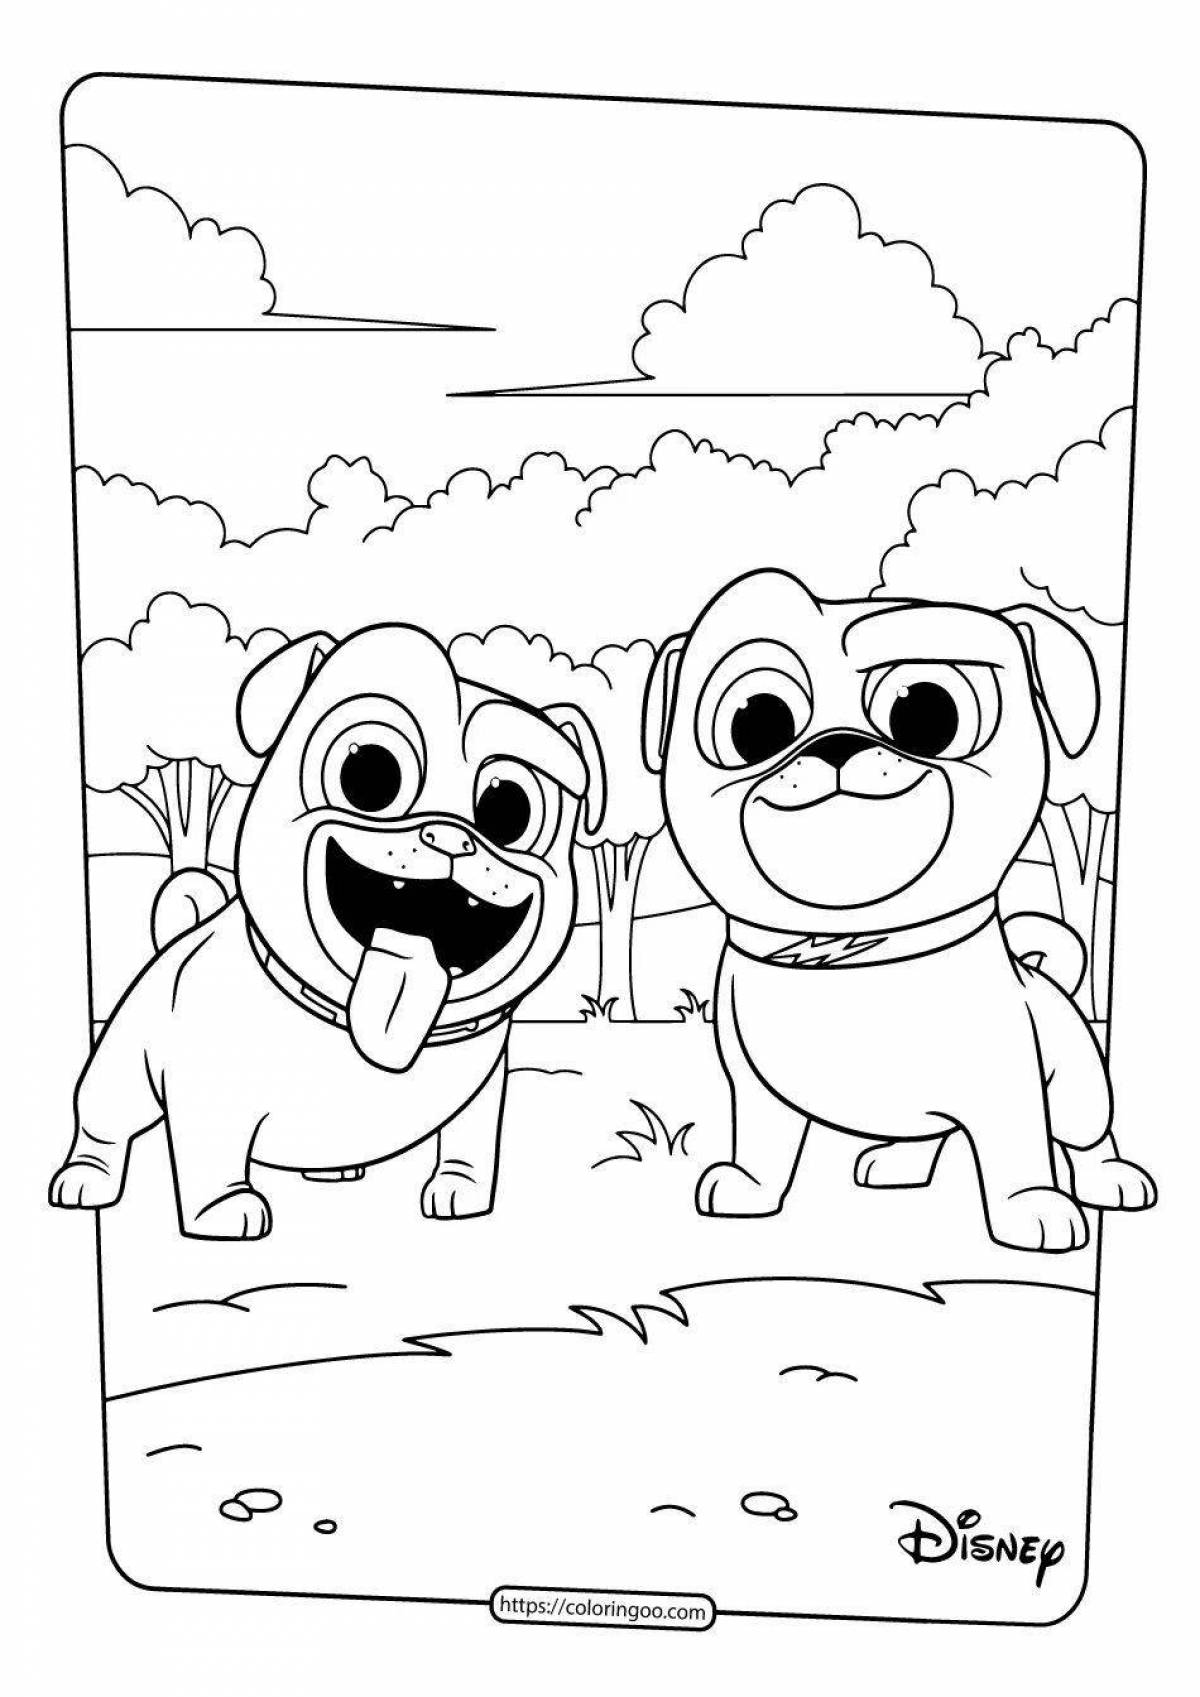 A wonderful pug coloring book for kids